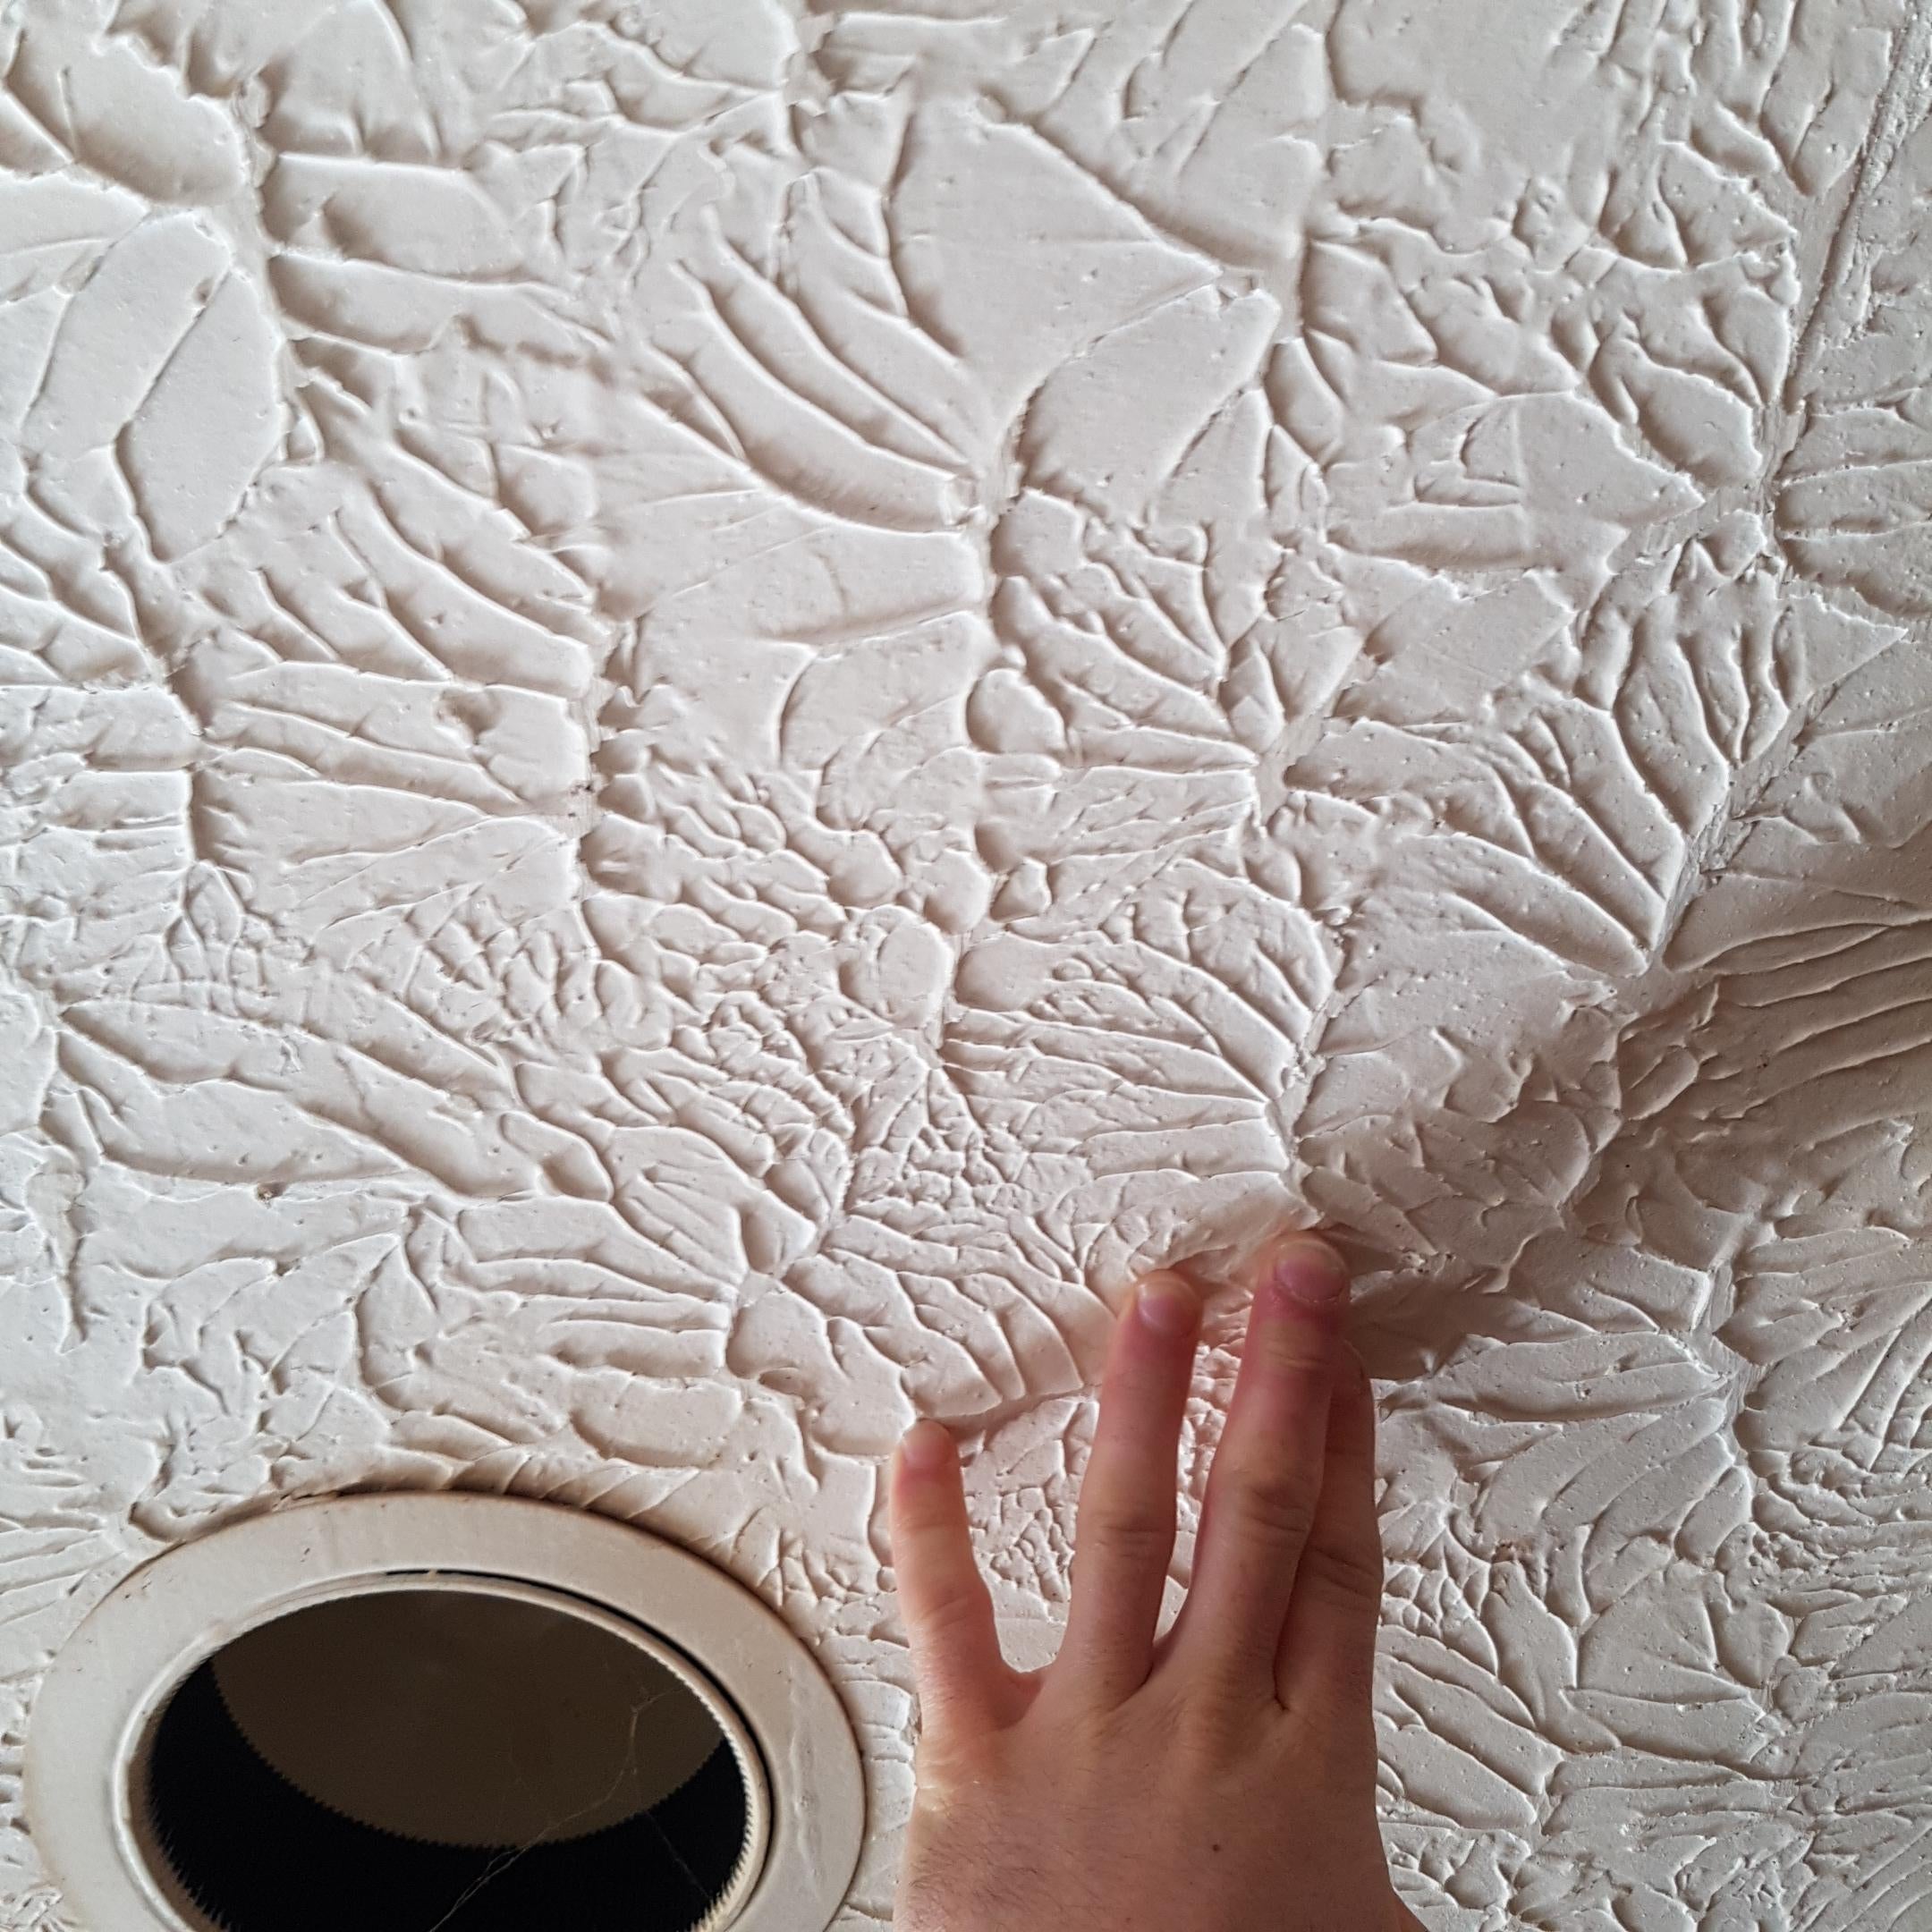 Matching A Textured Ceiling Drywall